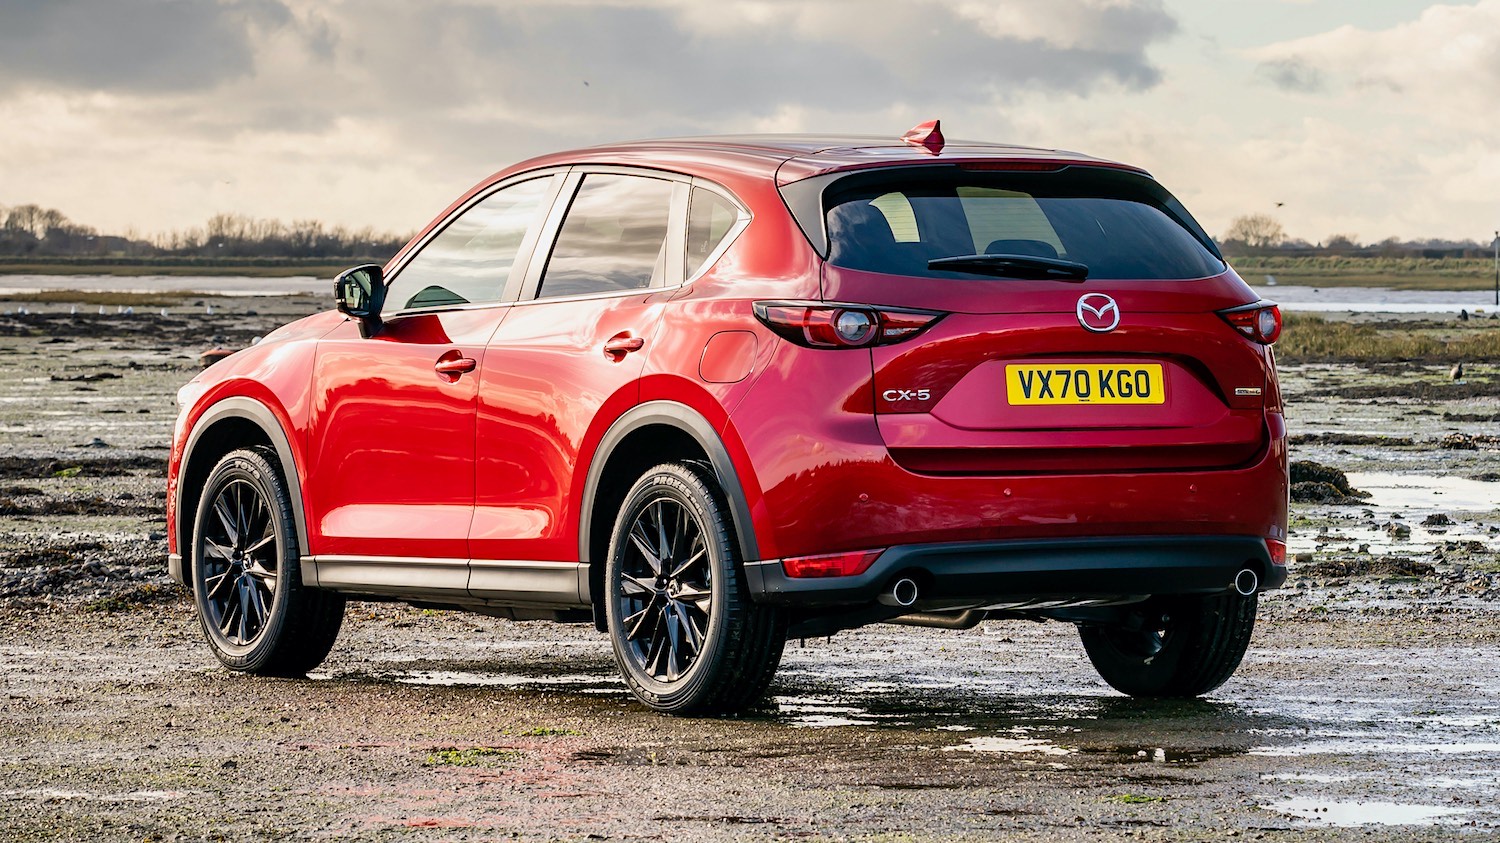 The sterling qualities of the Mazda CX-5 and Mazda6